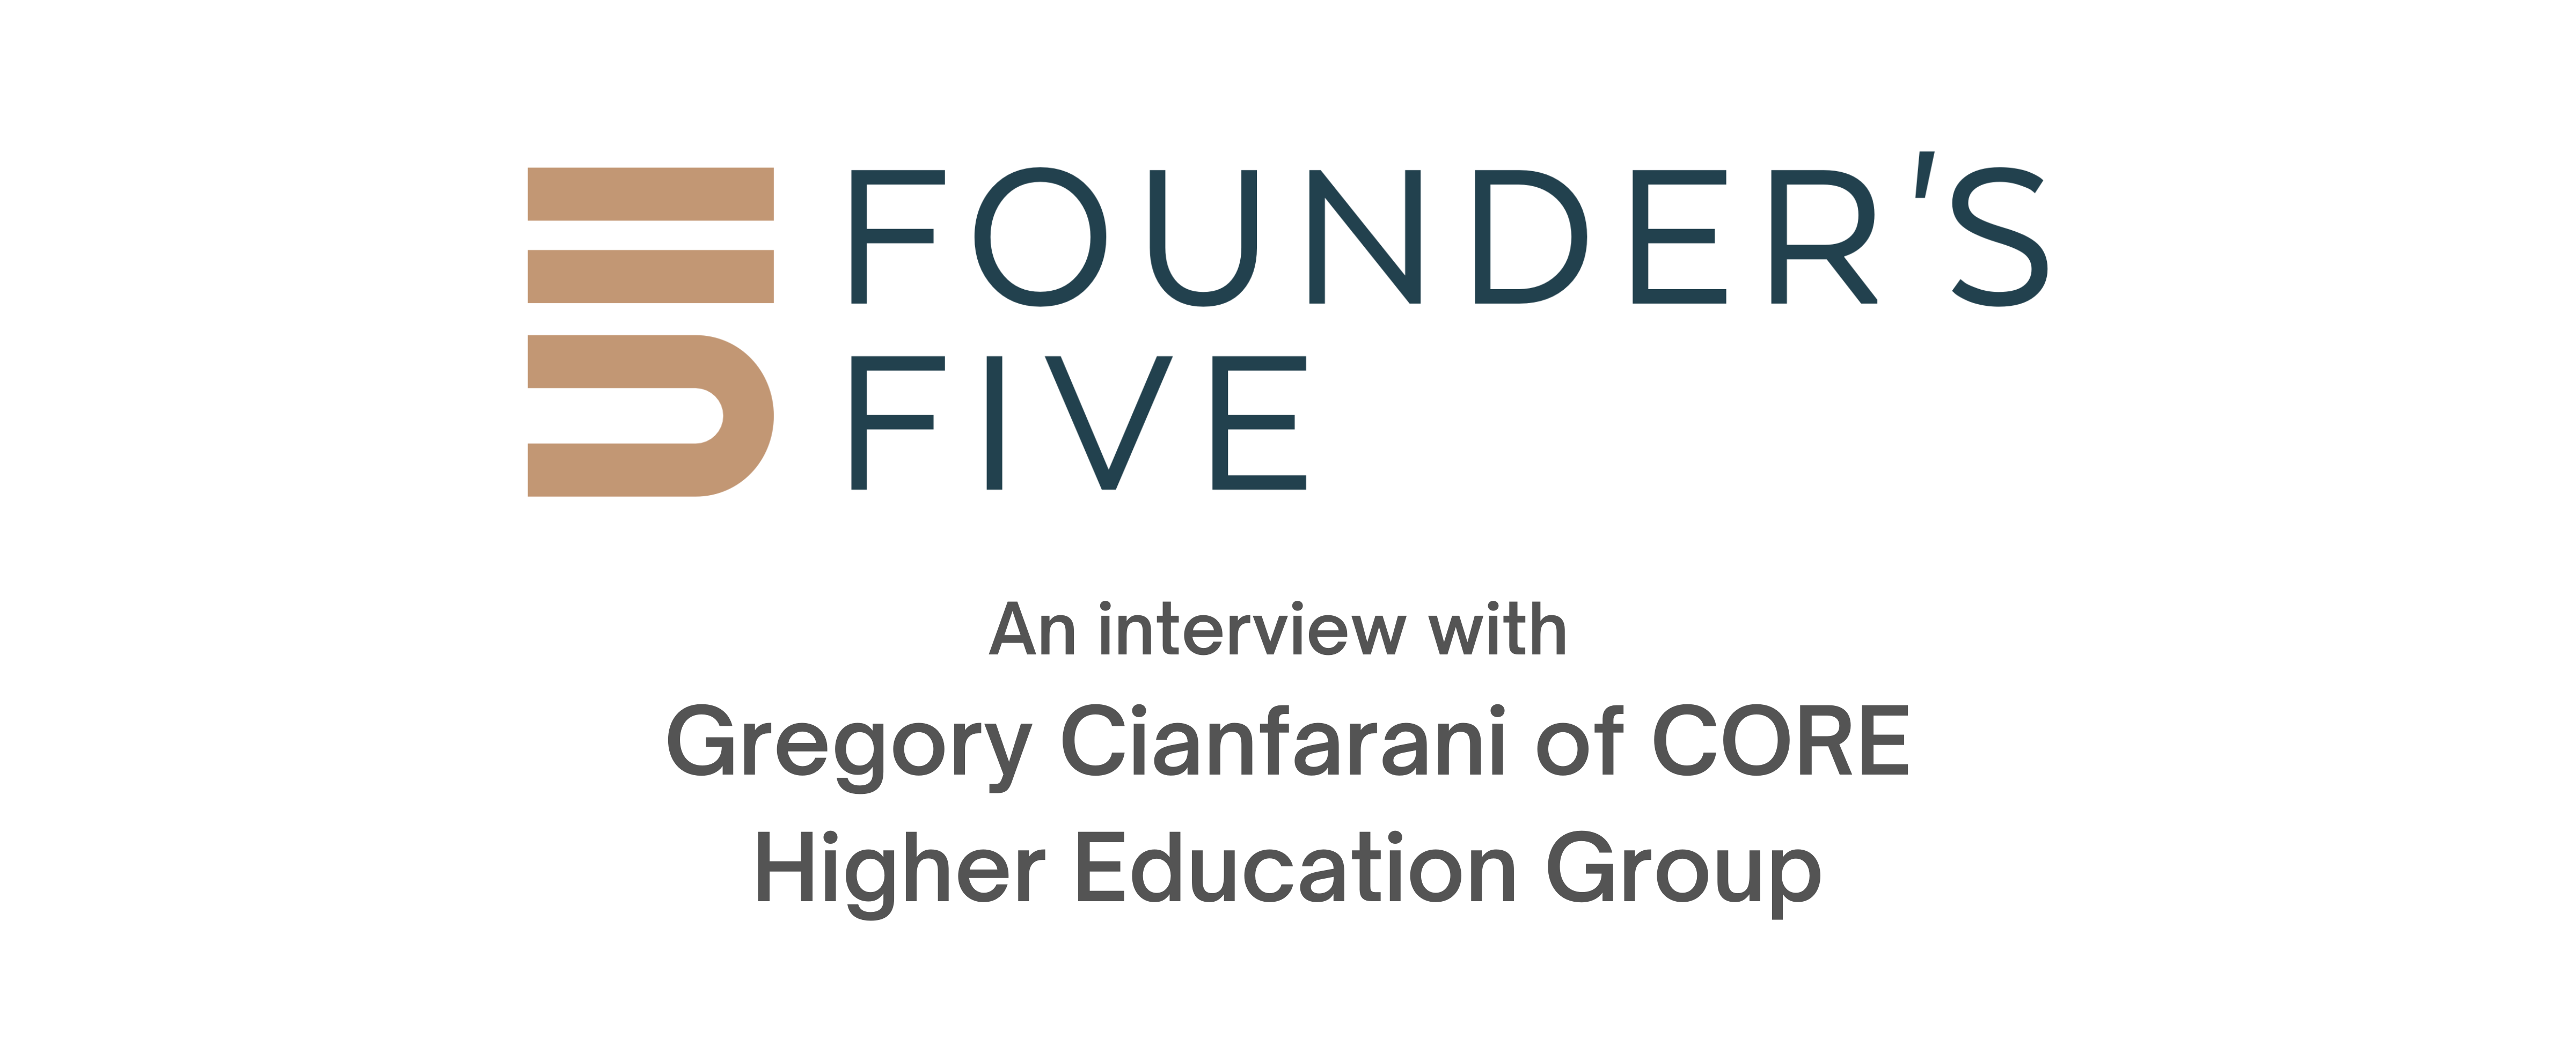 Tyton Partners Founder's Five: Gregory Cianfarani of CORE Higher Education Group cover